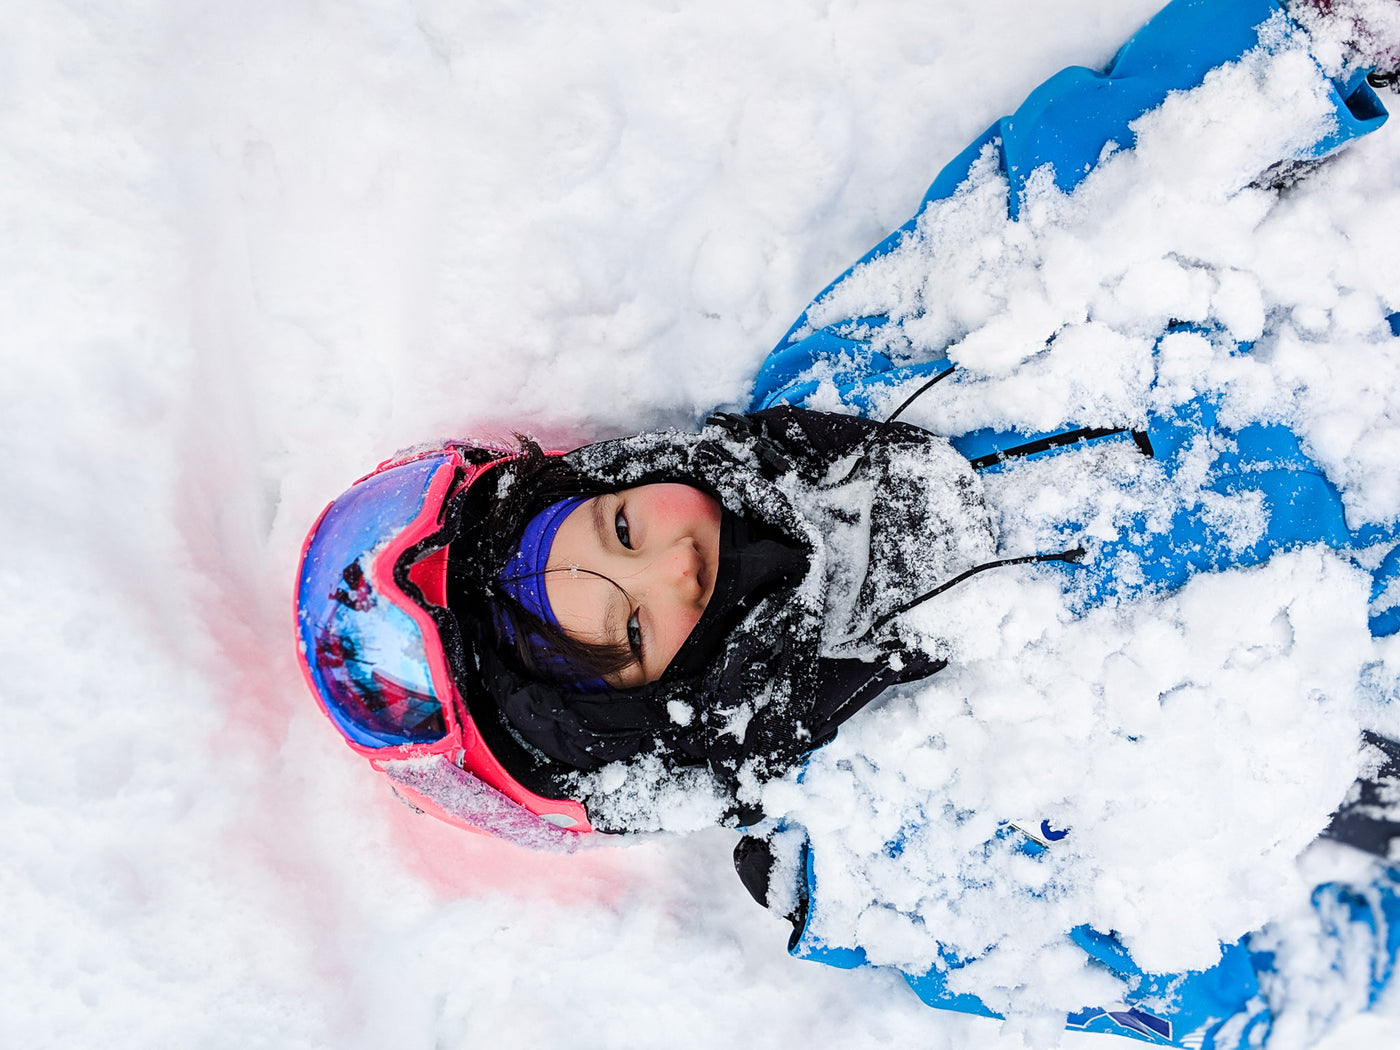 Smiling Girl in Blue Ski Jacket with Pink Helmet and Ski Goggles, Lying Half Buried In Snow